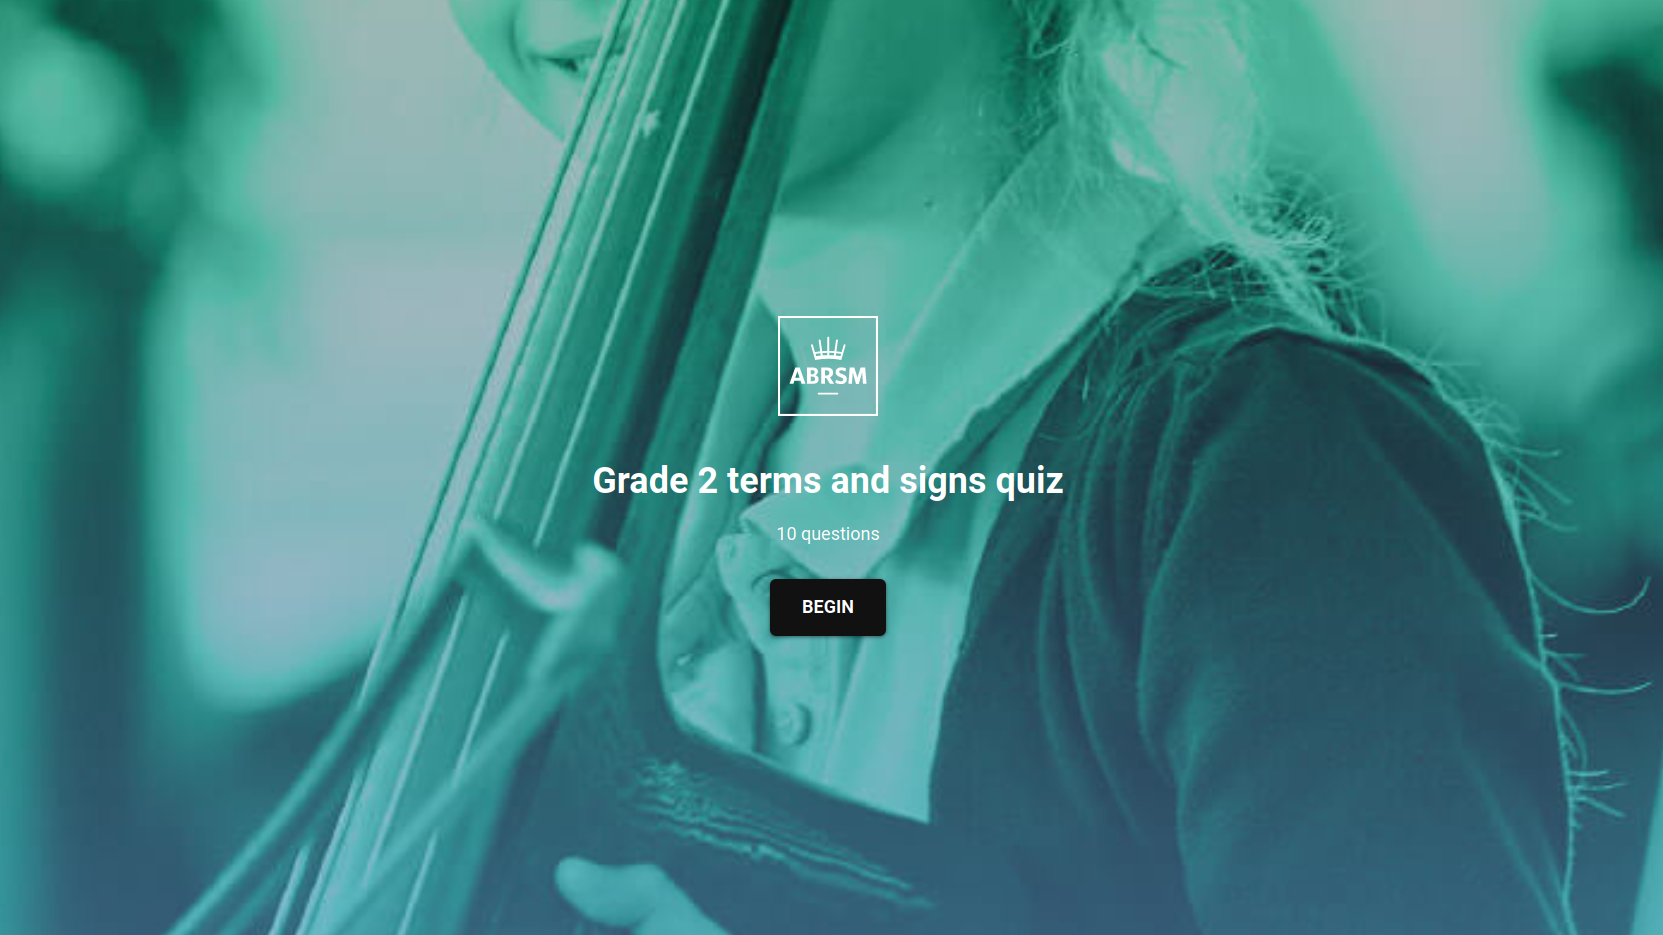 Abrsm Terms And Signs Quizzes - The Missing Link In The 2023 Site Revamp